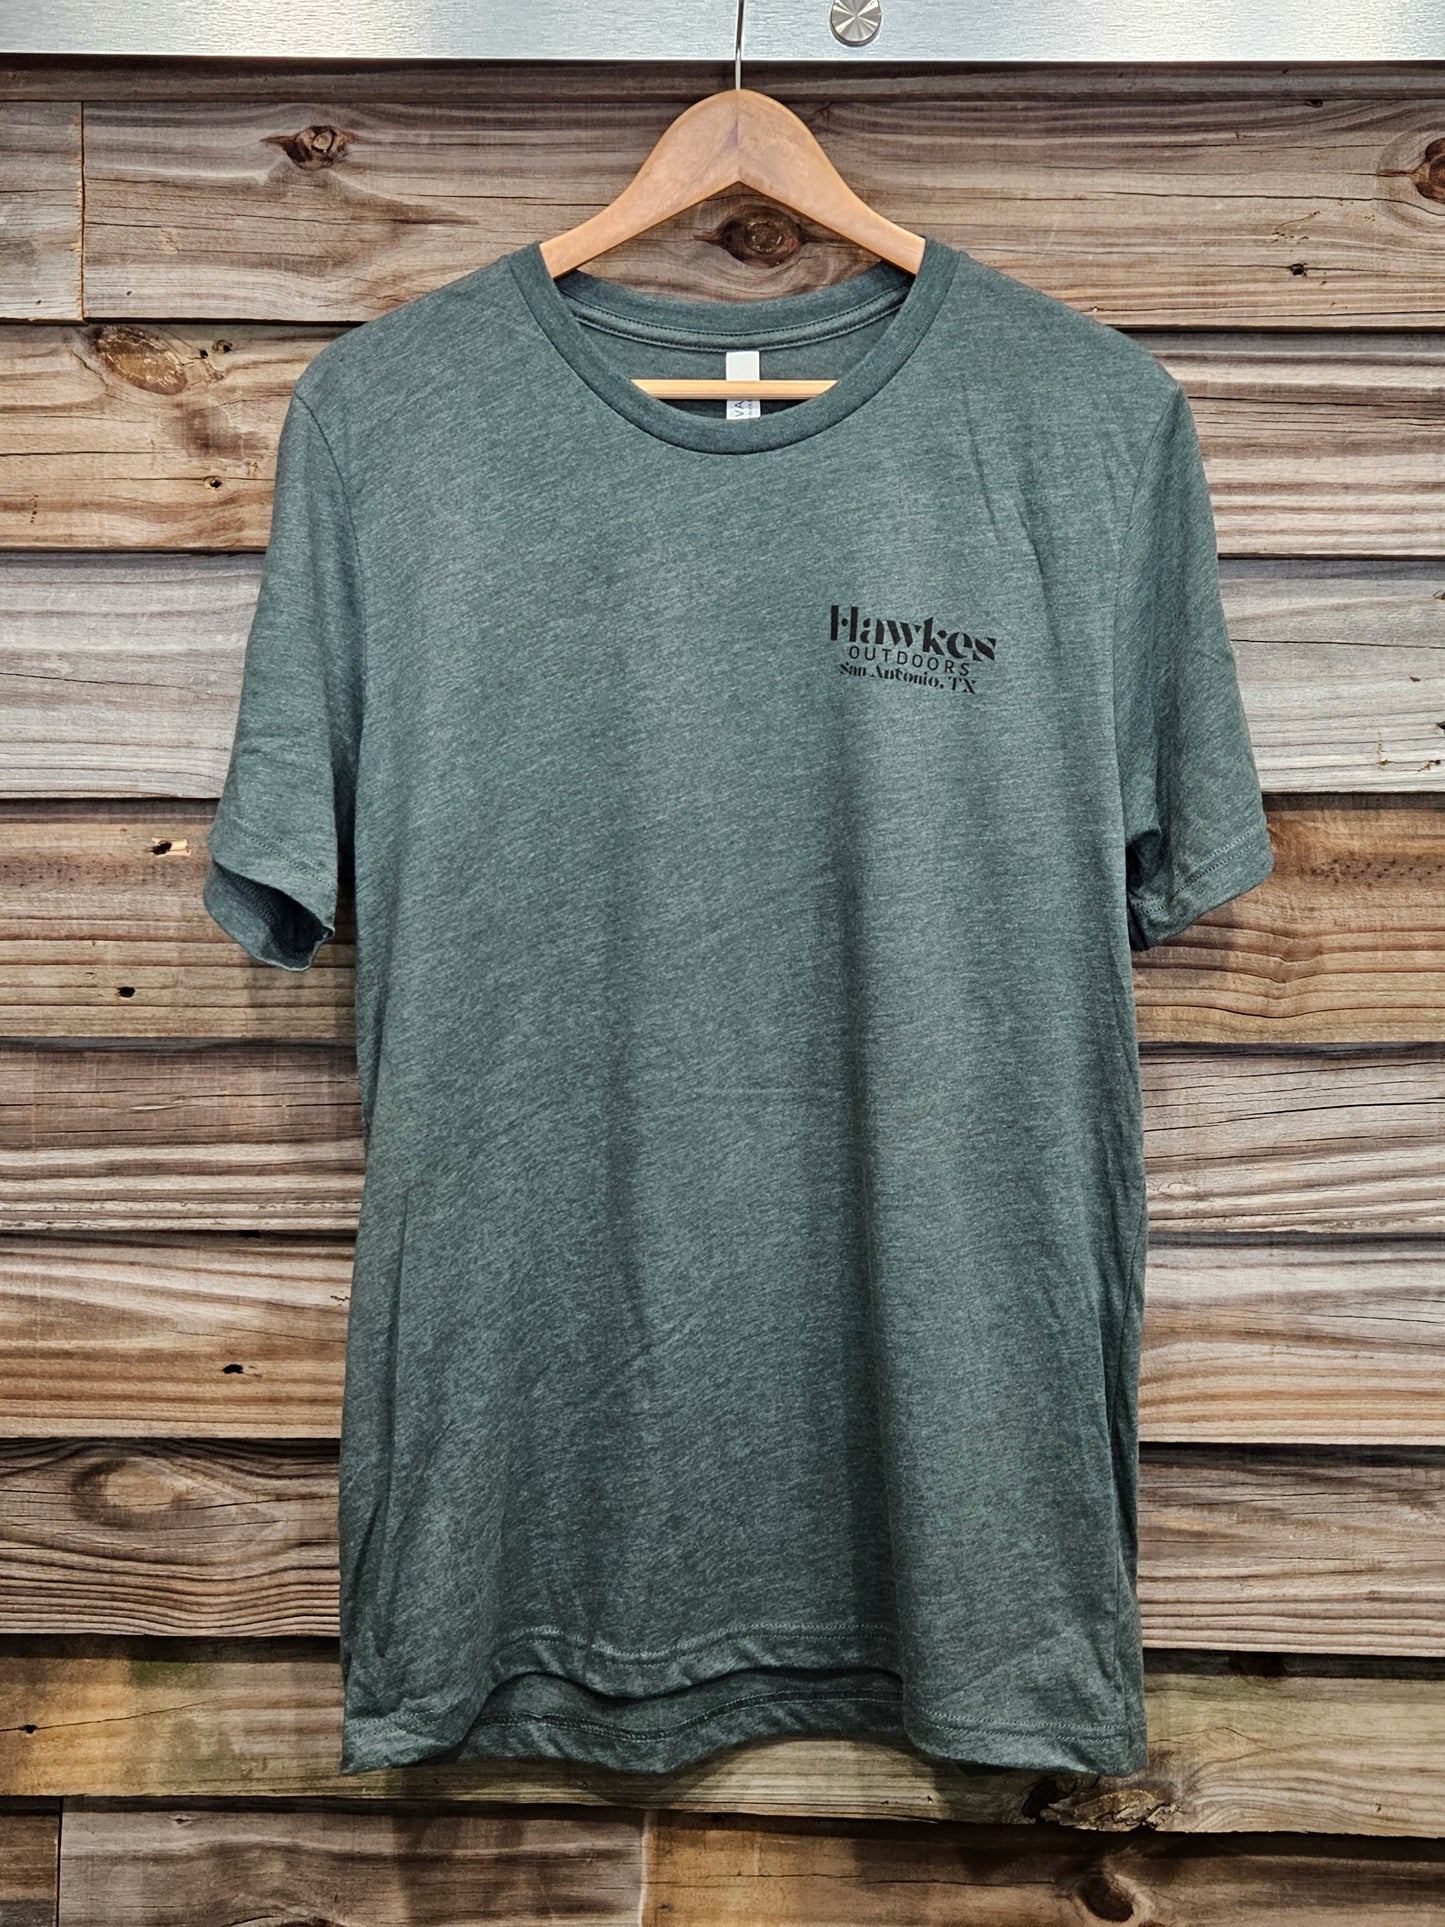 Hawkes T-Shirt - Your Terms